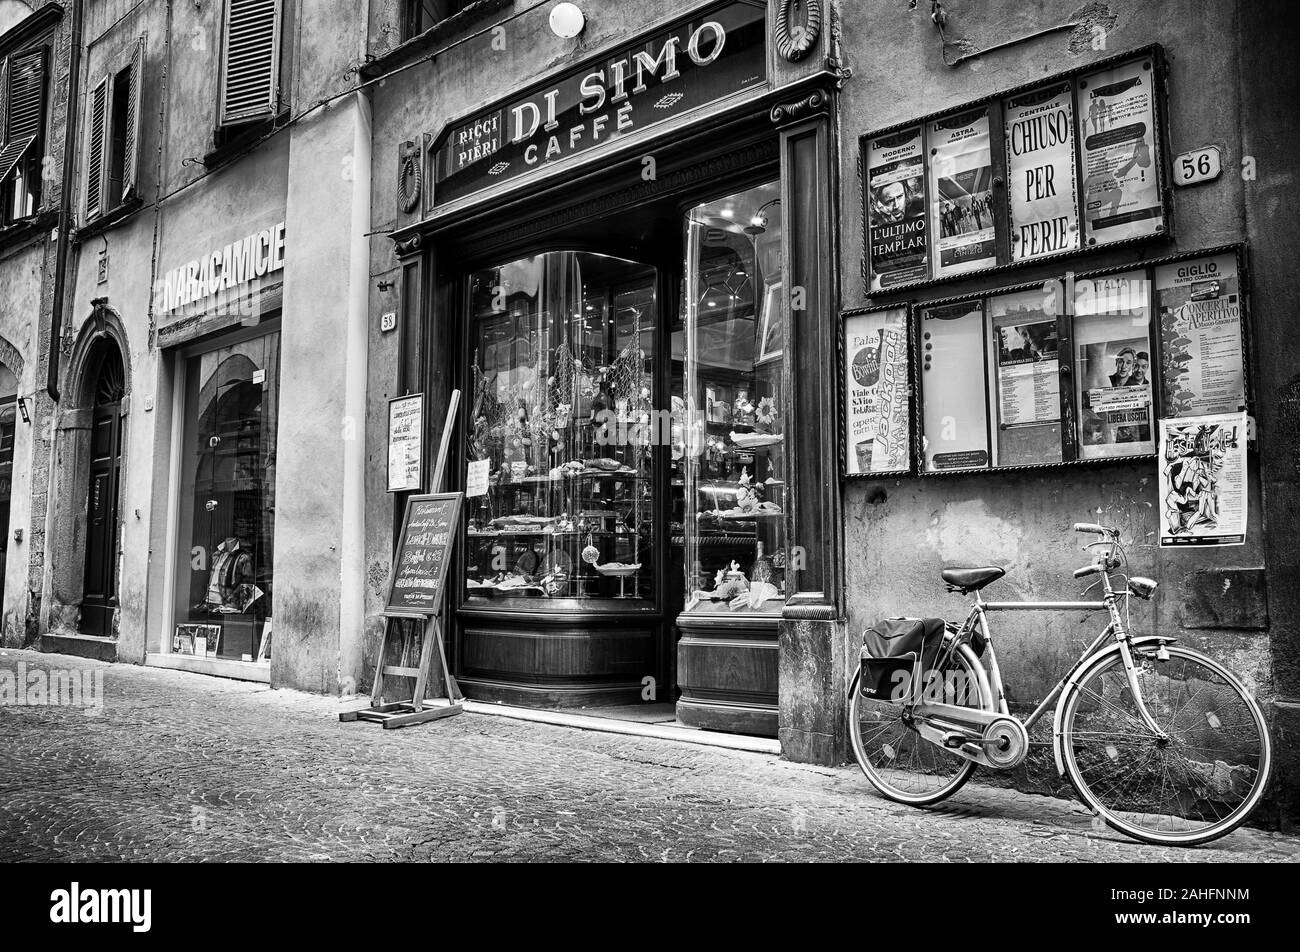 Caffe di simo hi-res stock photography and images - Alamy